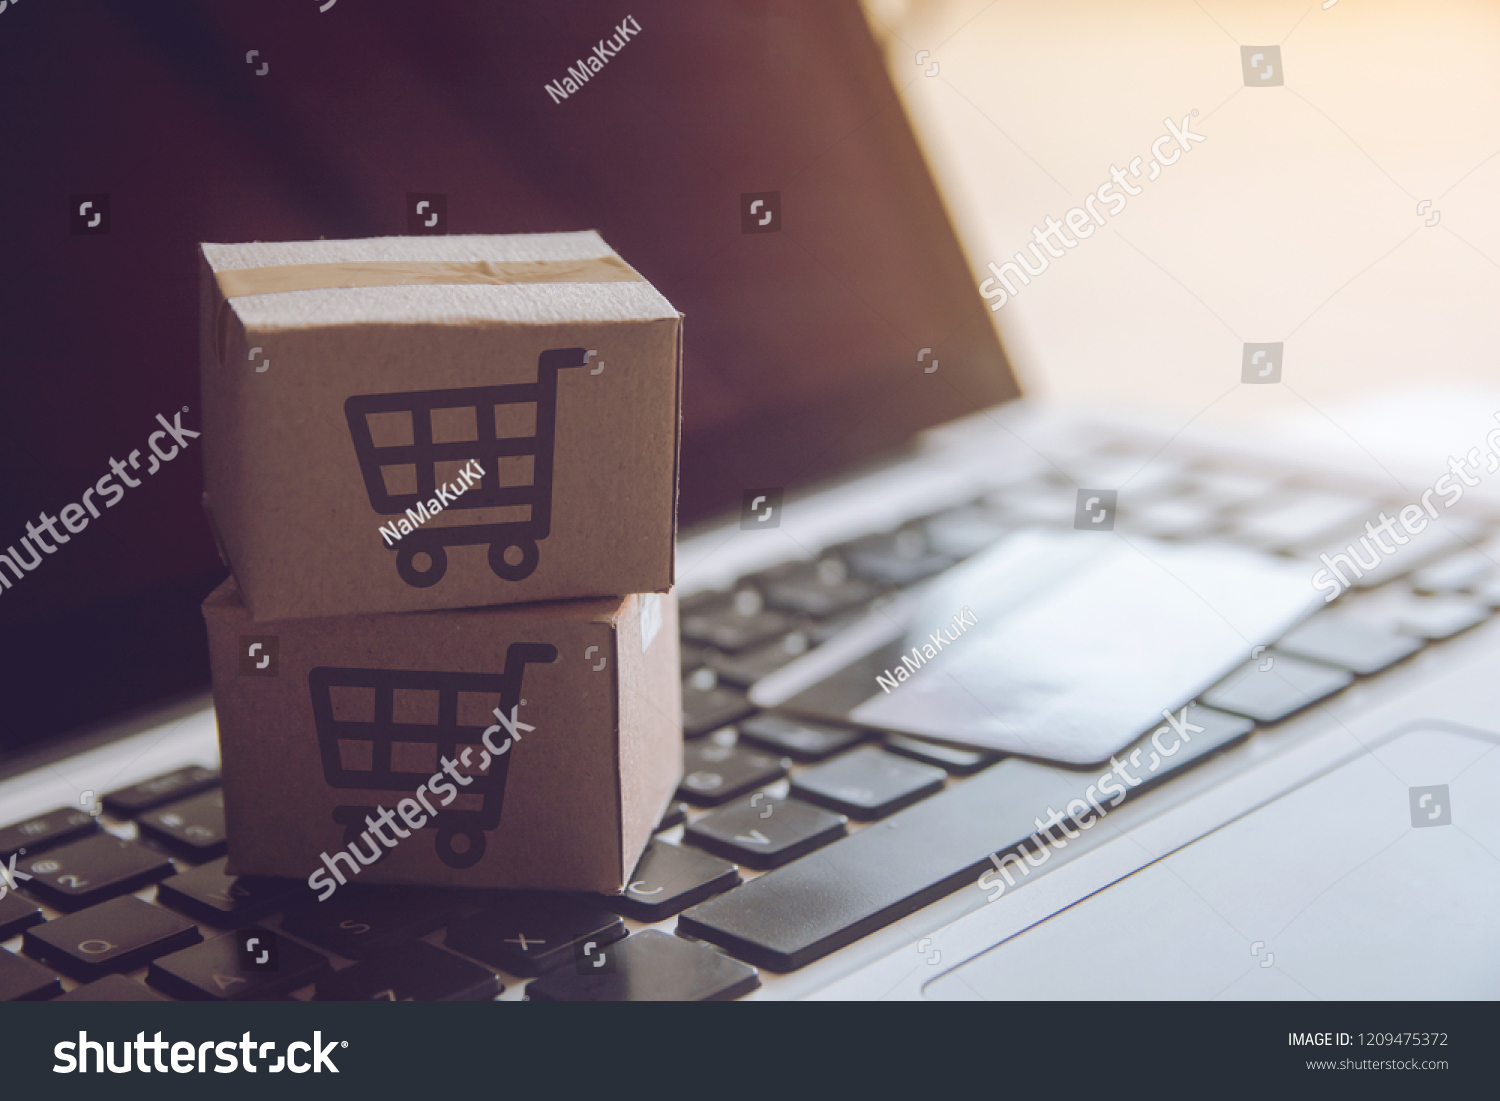 Shopping online concept - Shopping service on The online web. with payment by credit card and offers home delivery. parcel or Paper cartons with a shopping cart logo on a laptop keyboard
 #1209475372